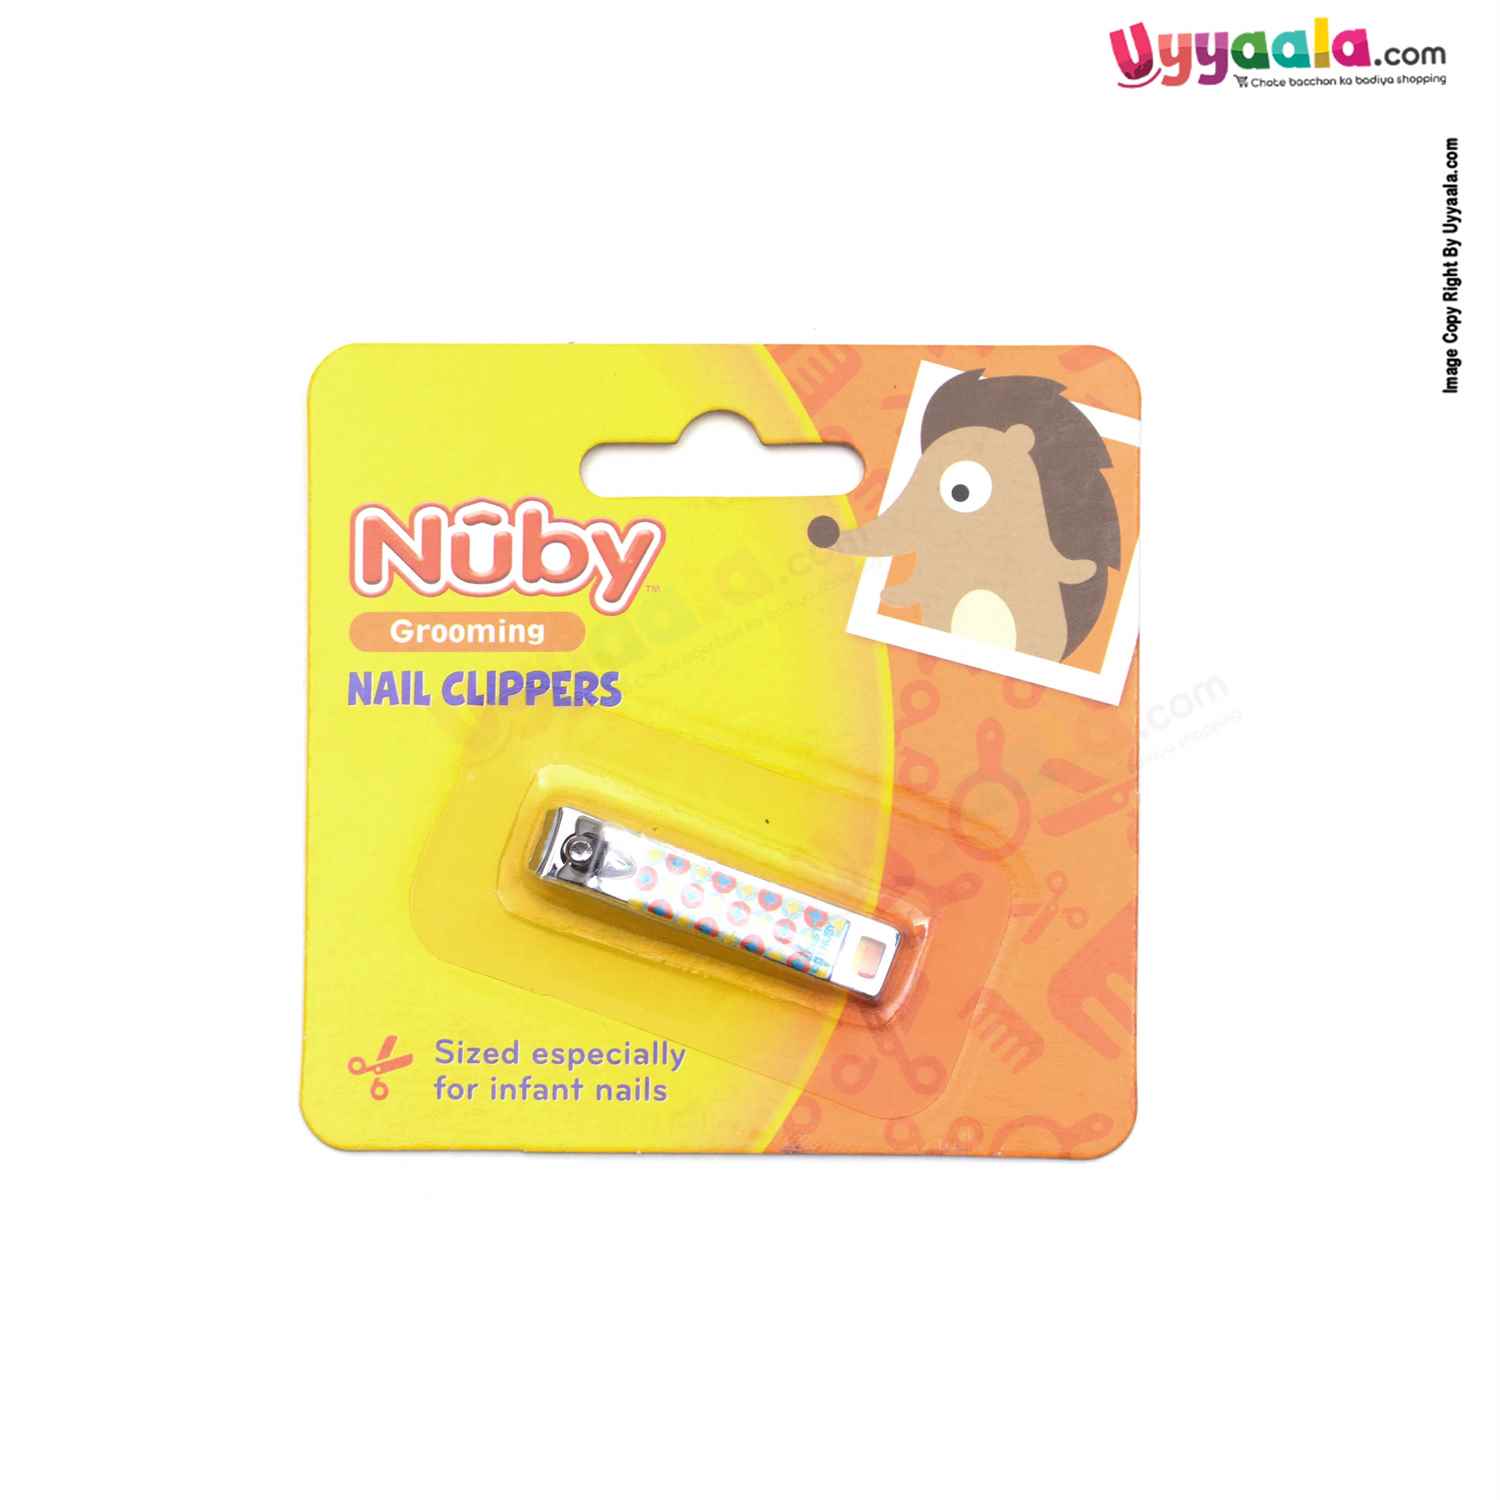 NUBY Nail clipper for infant nails - 0+m